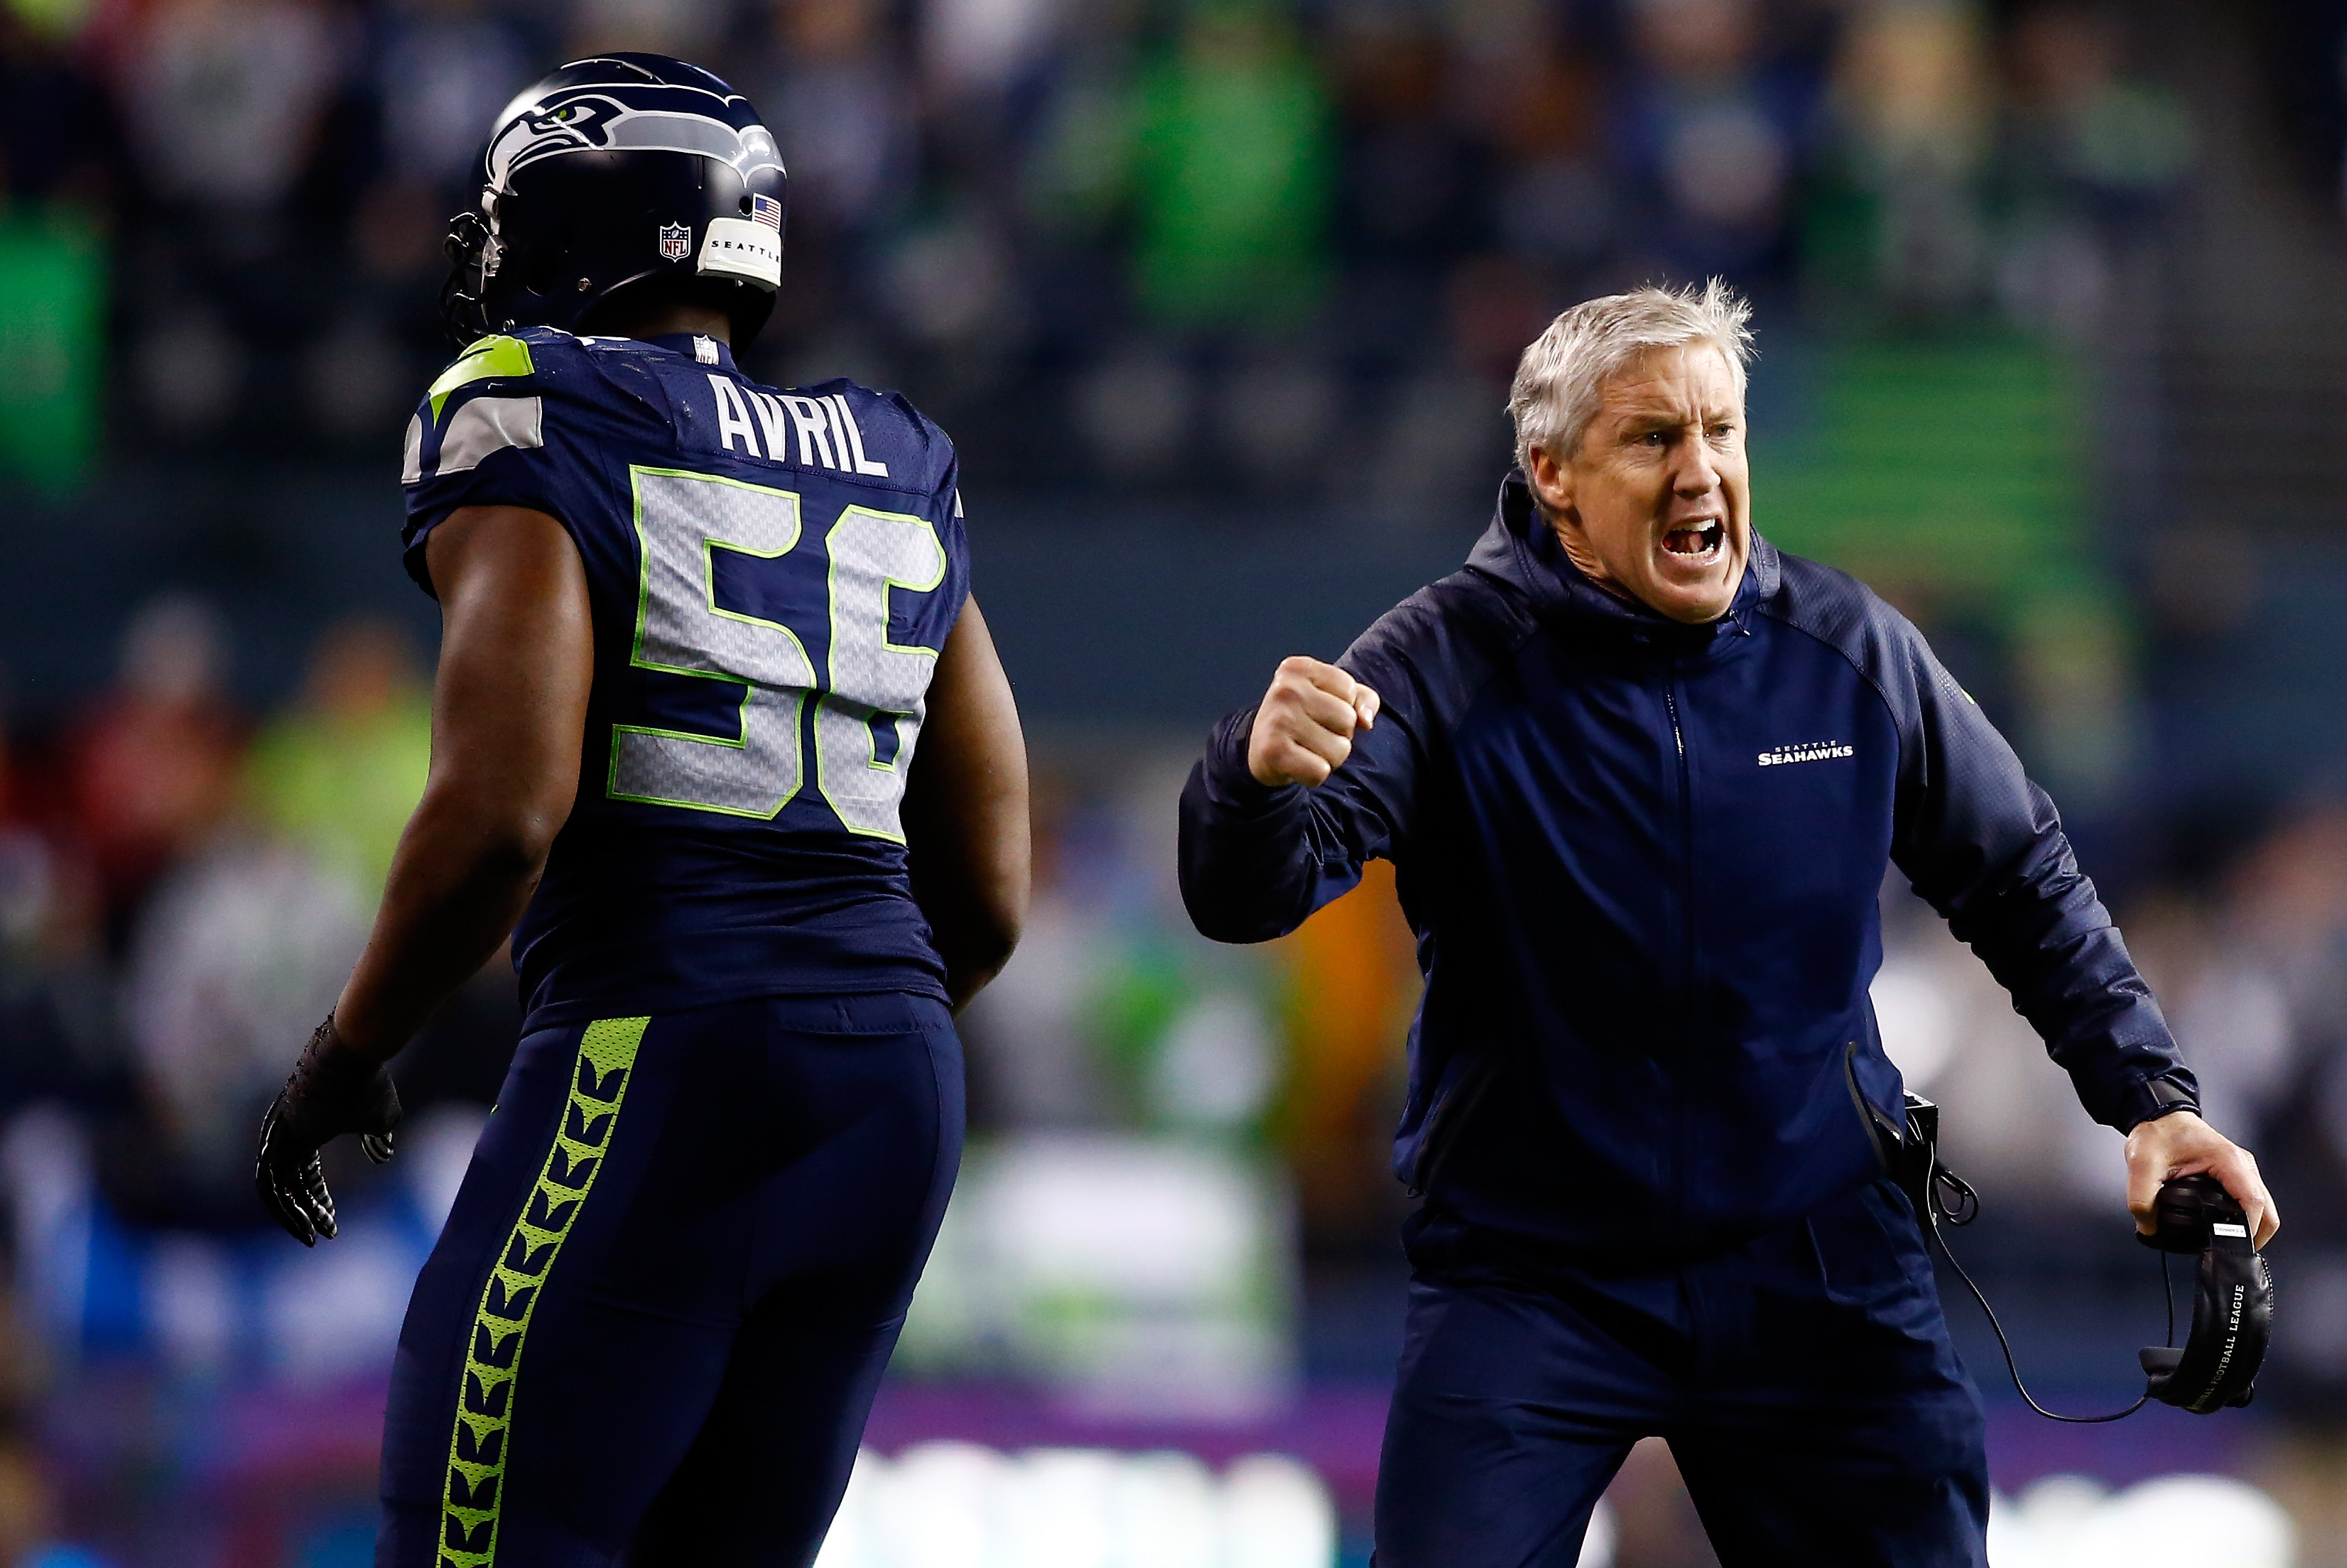 Seahawks defensive end Cliff Avril runs off the field while Pete Carroll yells